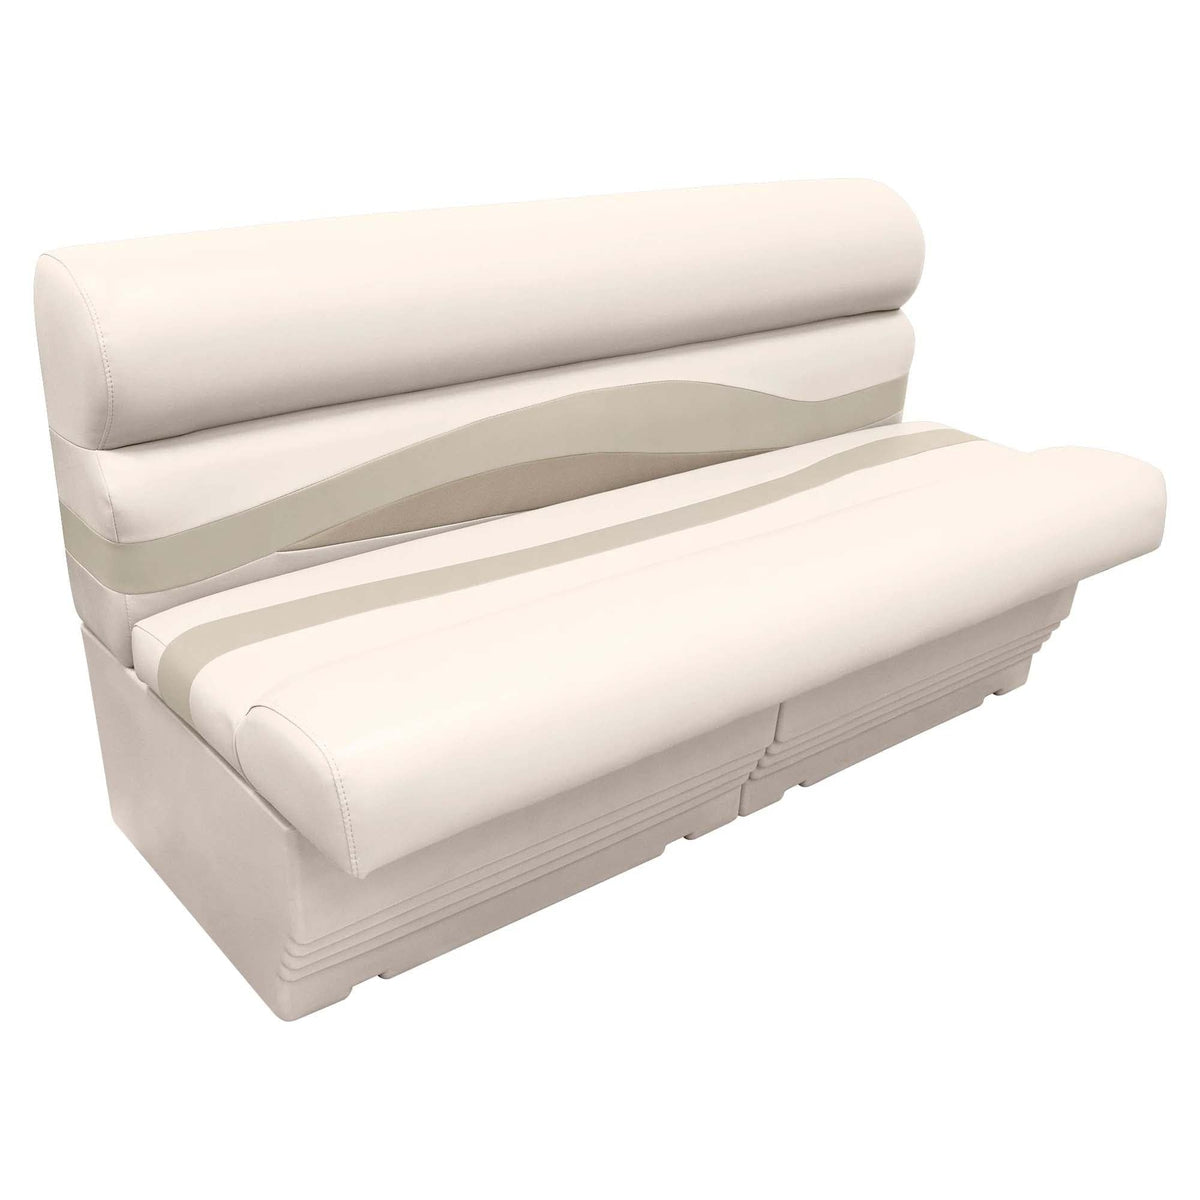 Wise Not Qualified for Free Shipping Wise Premier Pontoon 55" Bench #BM1155-1066